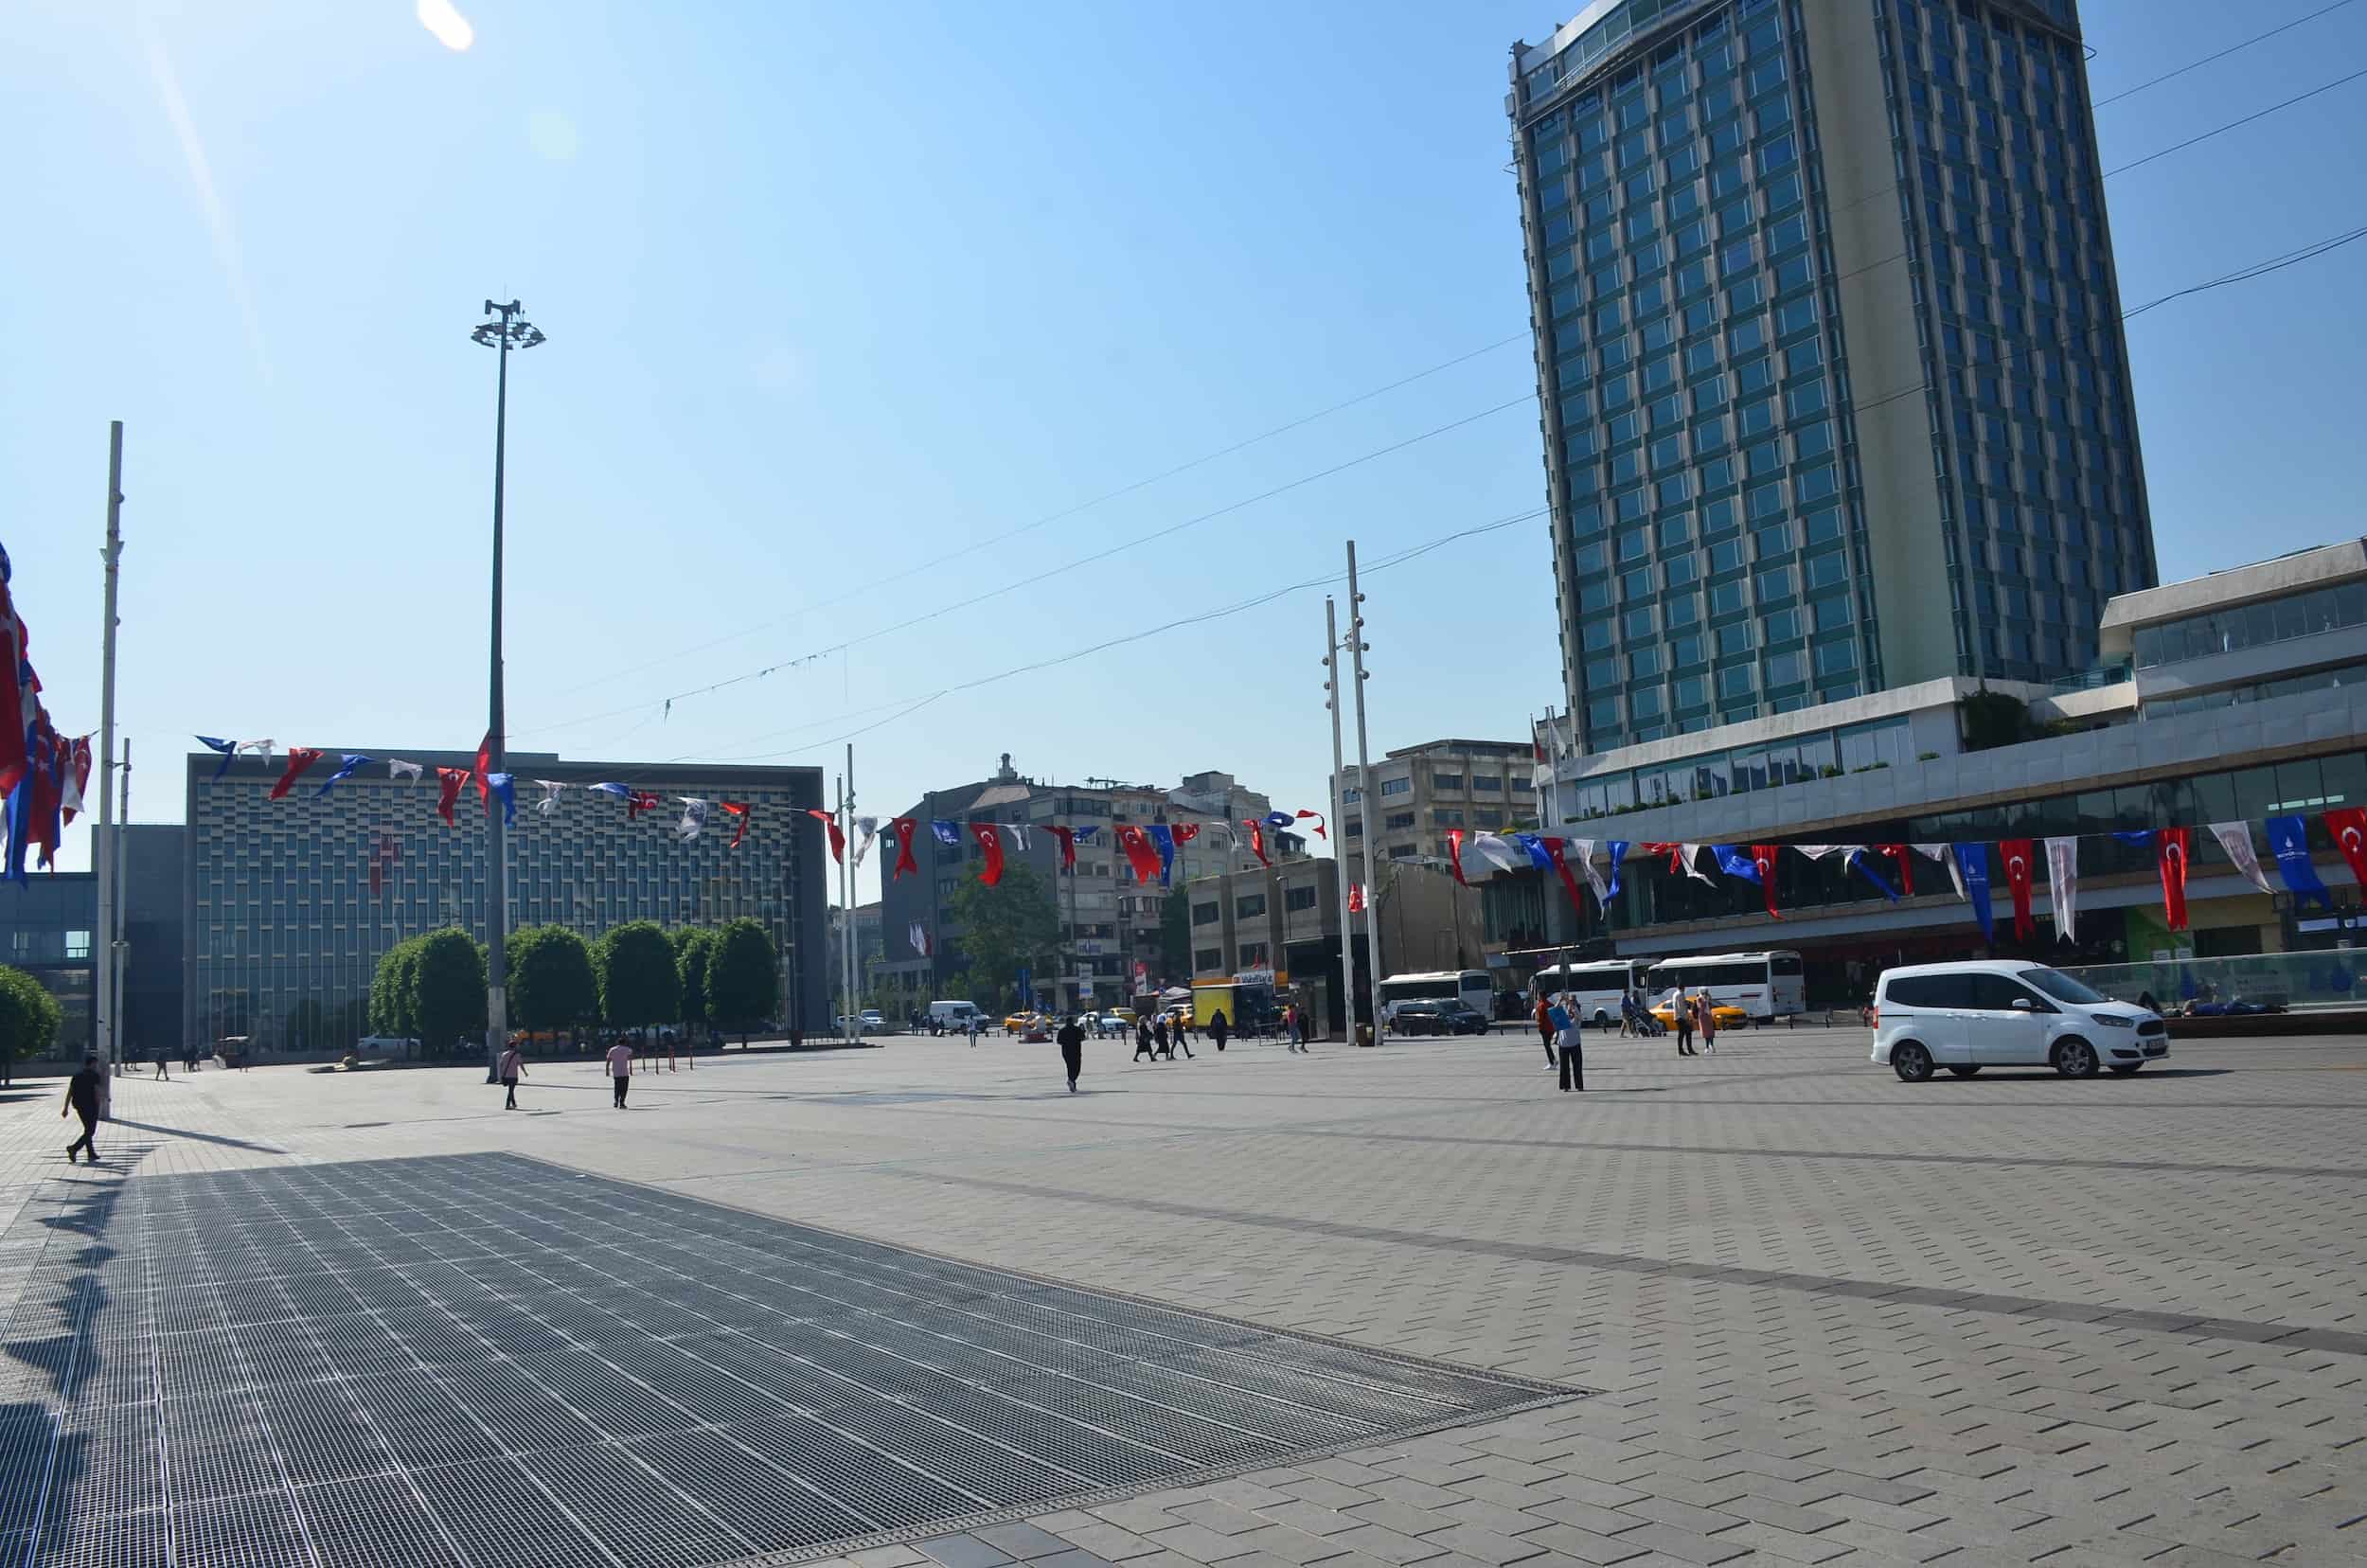 Taksim Square in May 2022 in Istanbul, Turkey